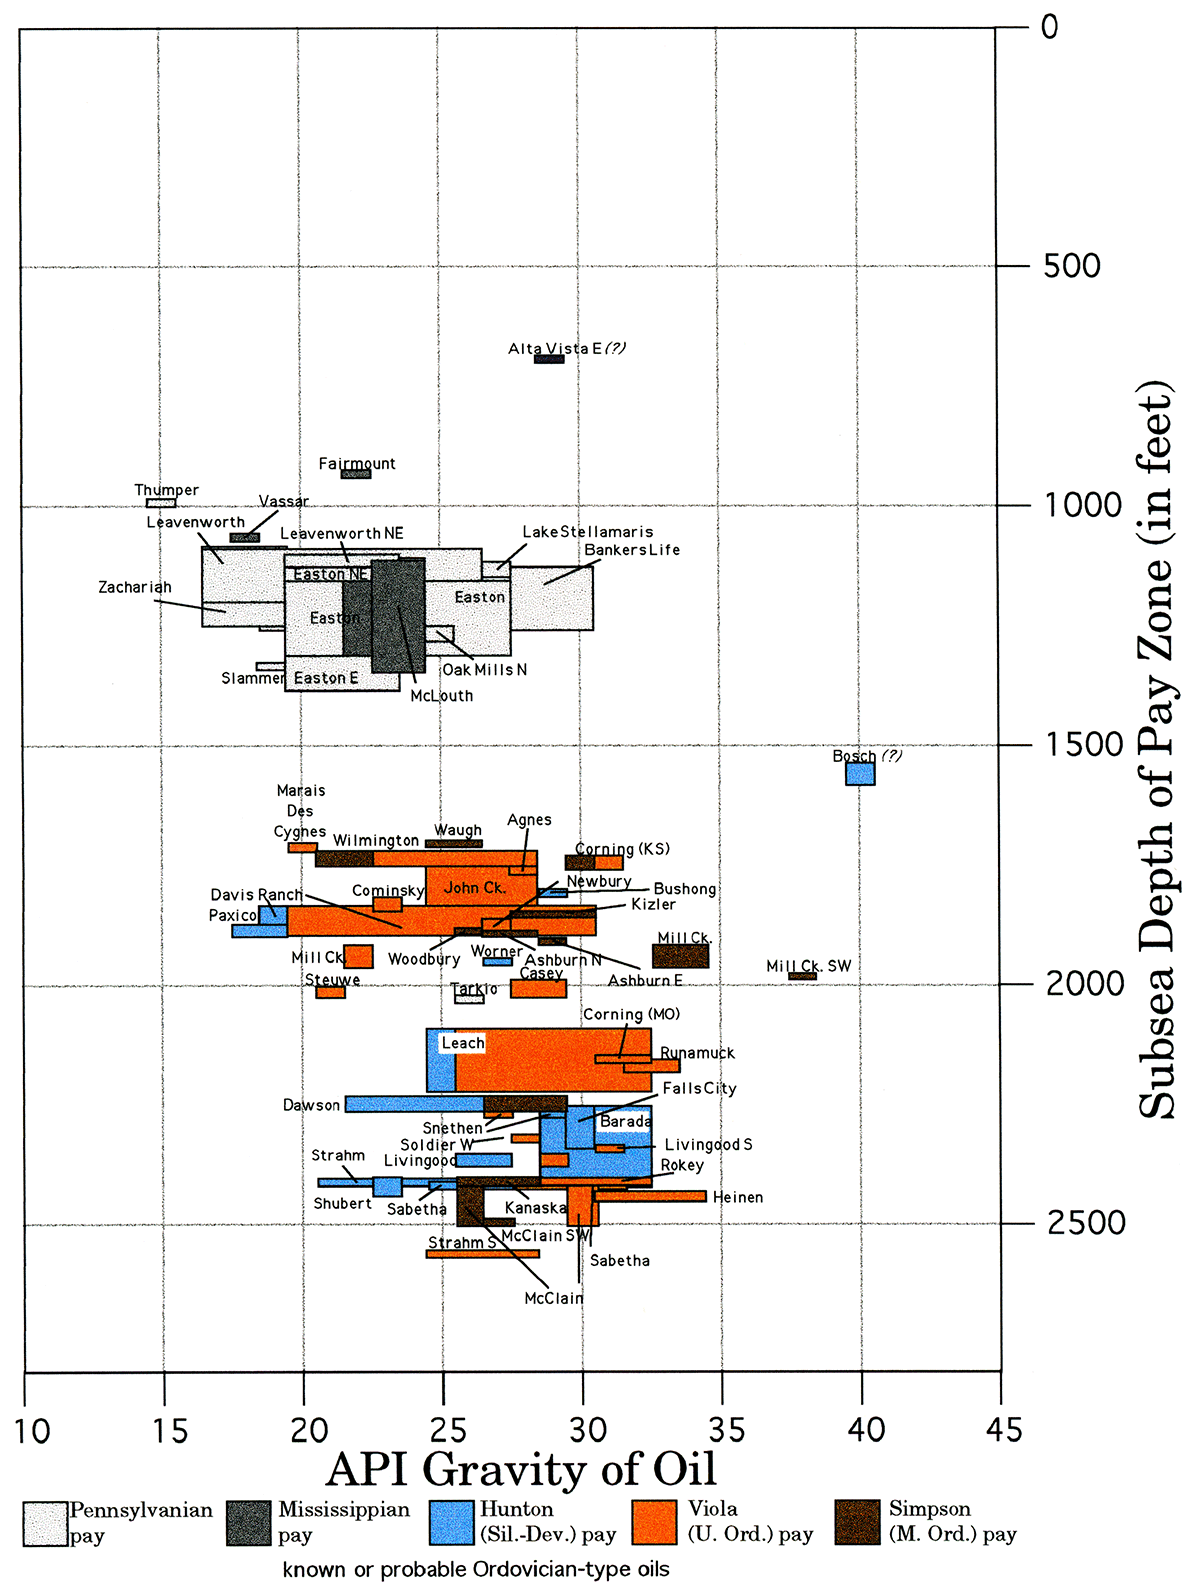 API gravity of oils in the central part of the Forest City basin (at depth of Simpson Gp.).